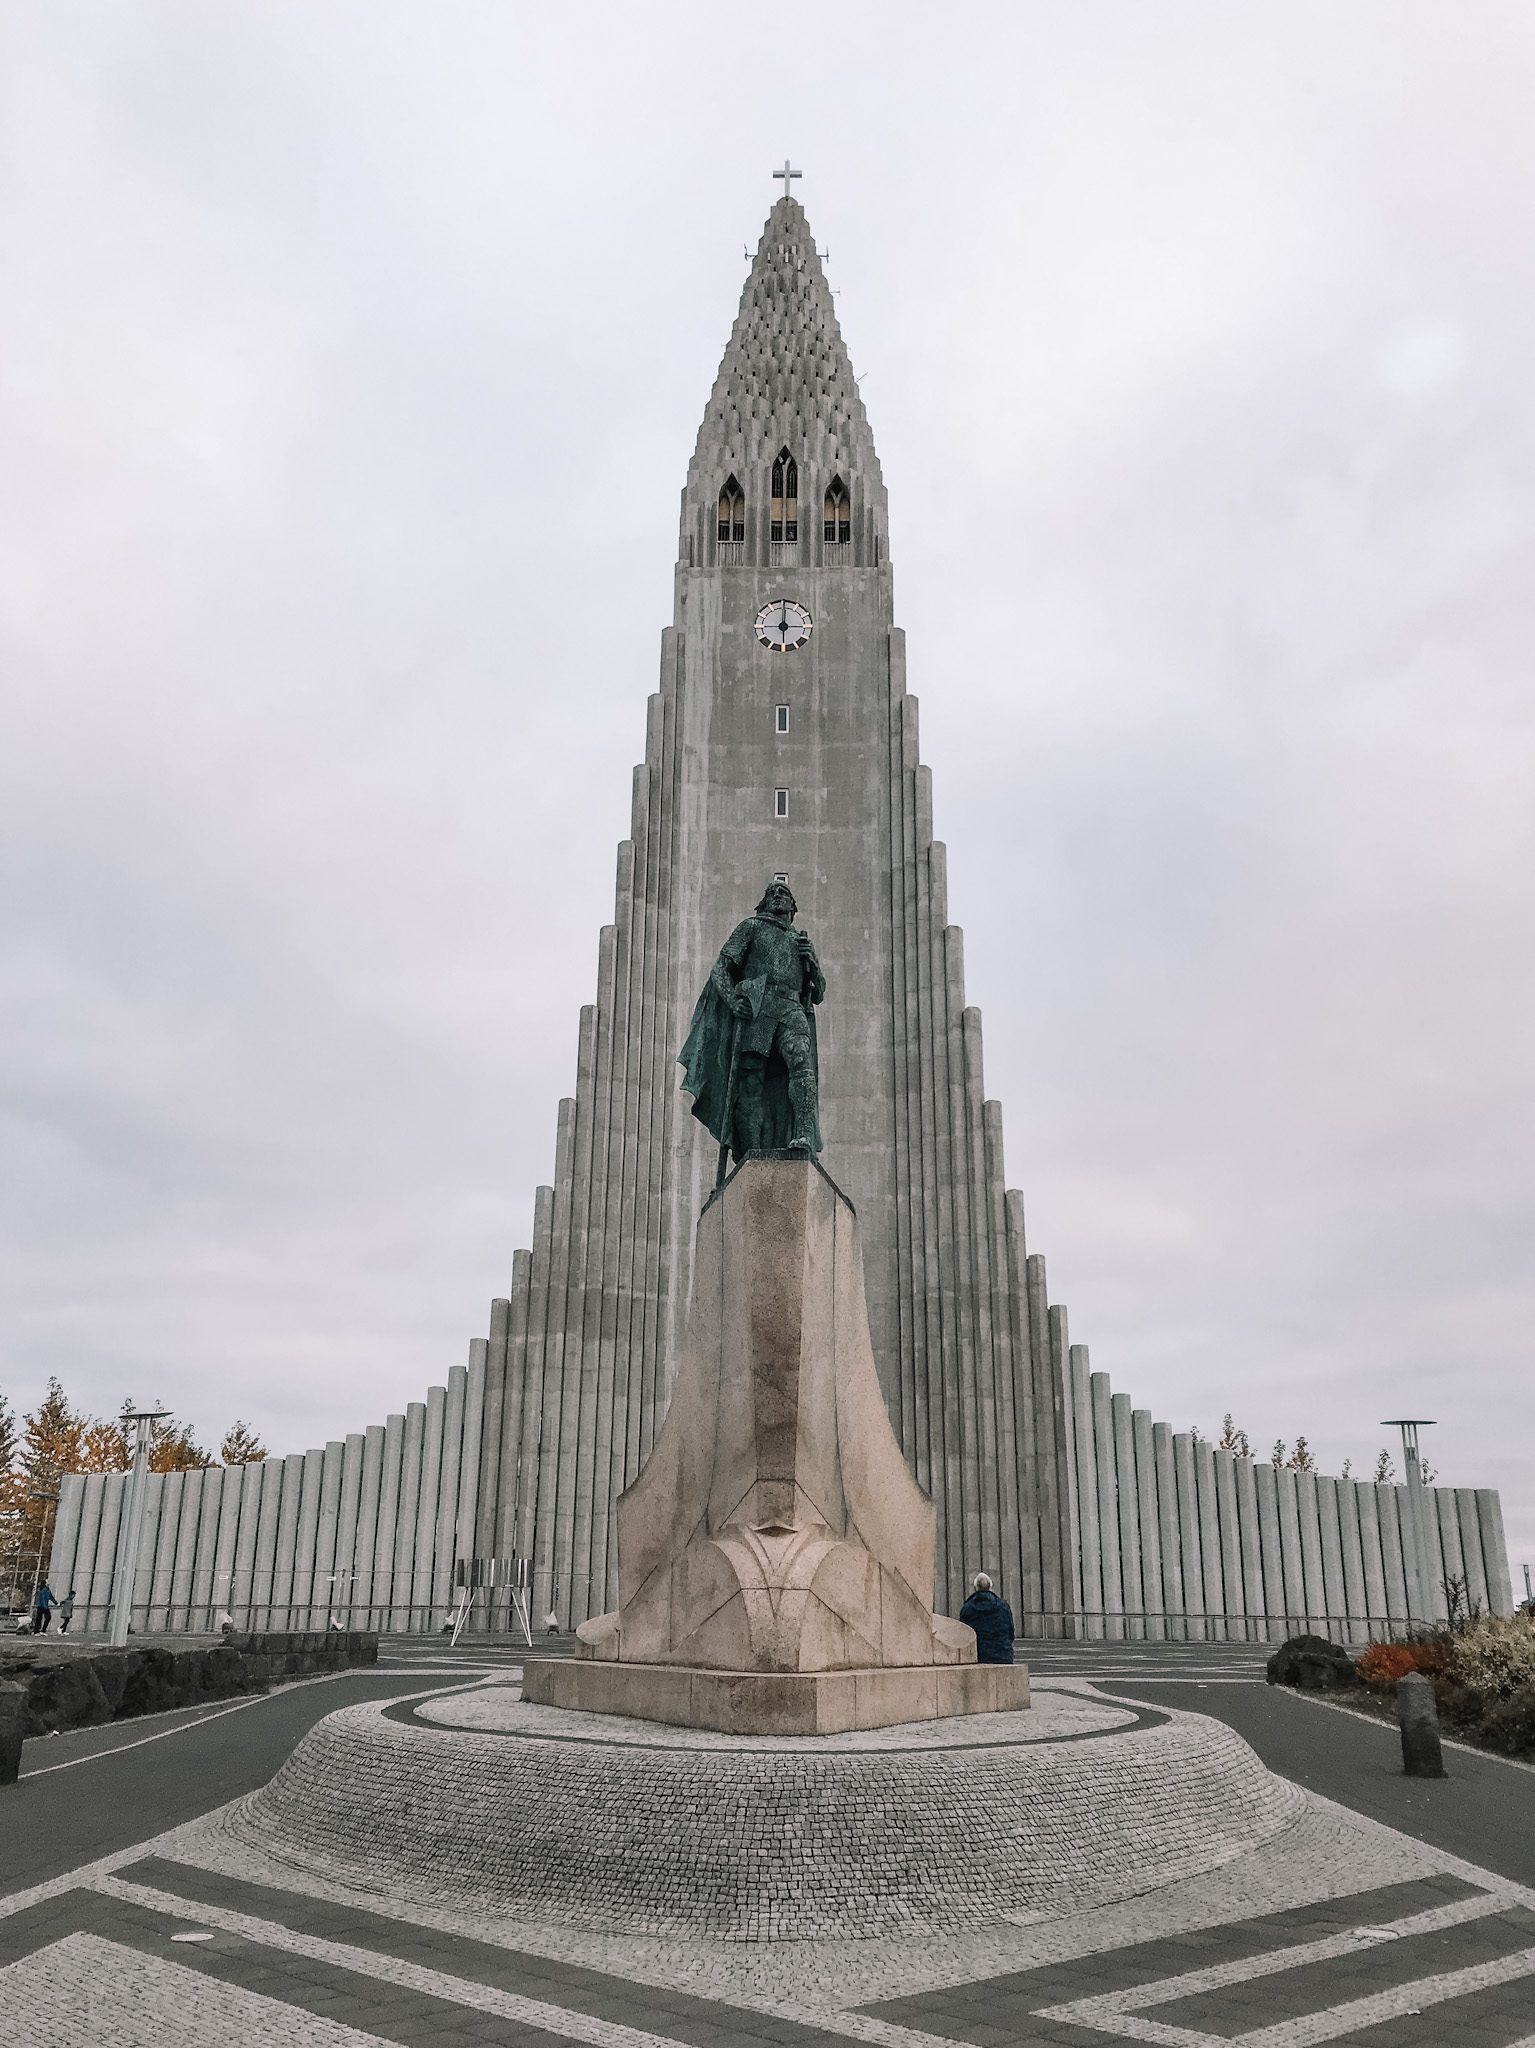 Remarkable Iceland Itinerary - 8 Days Traveling Through the South ...